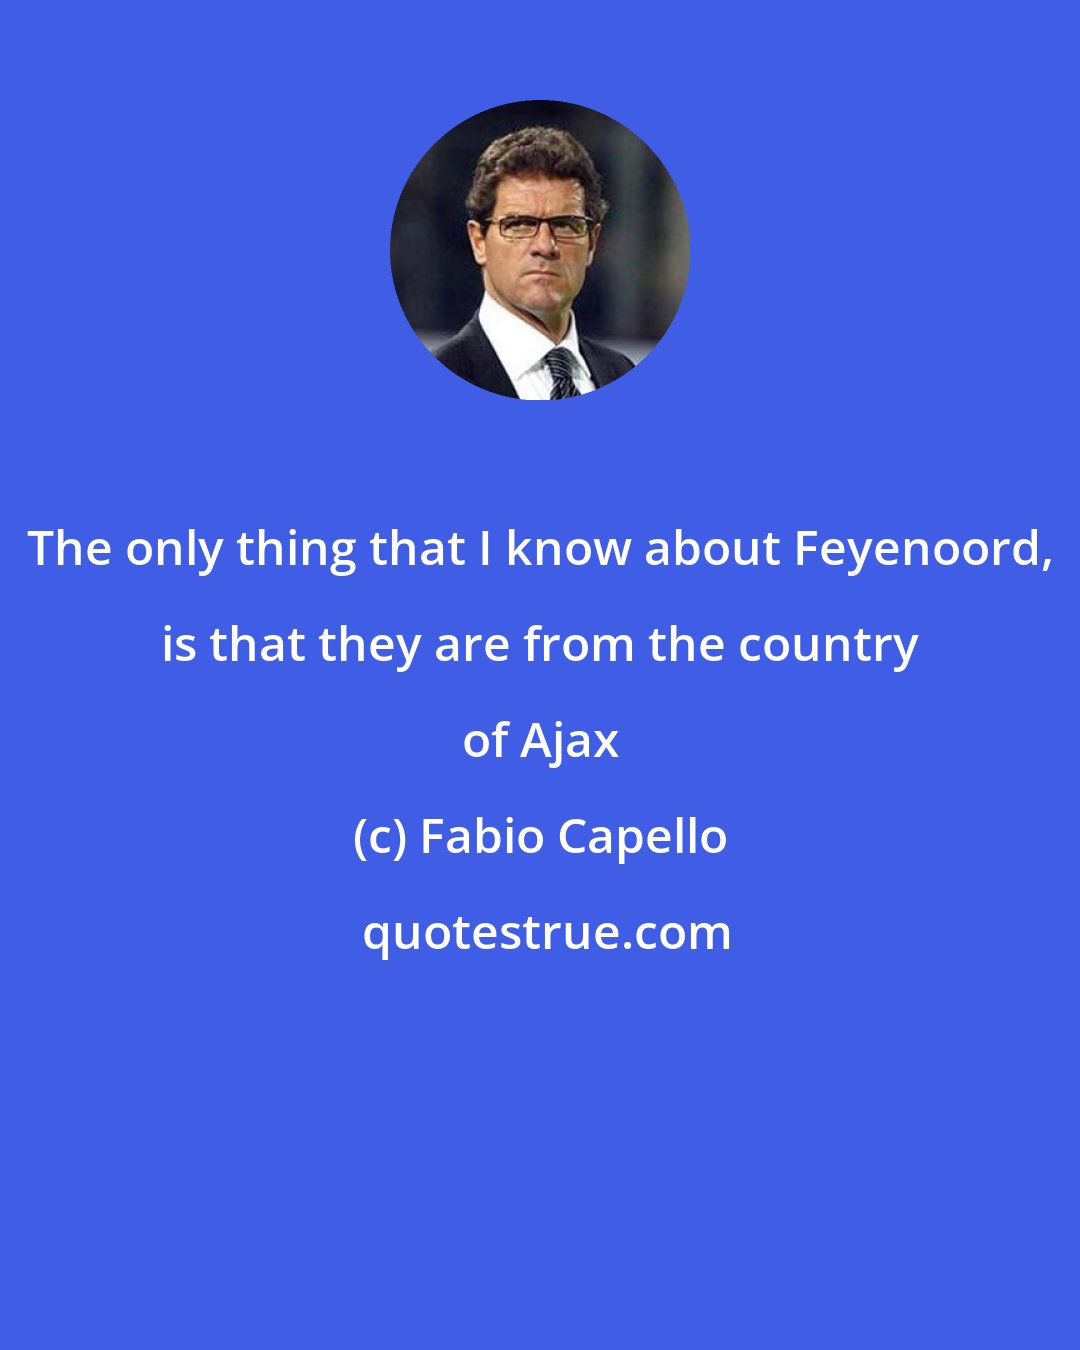 Fabio Capello: The only thing that I know about Feyenoord, is that they are from the country of Ajax